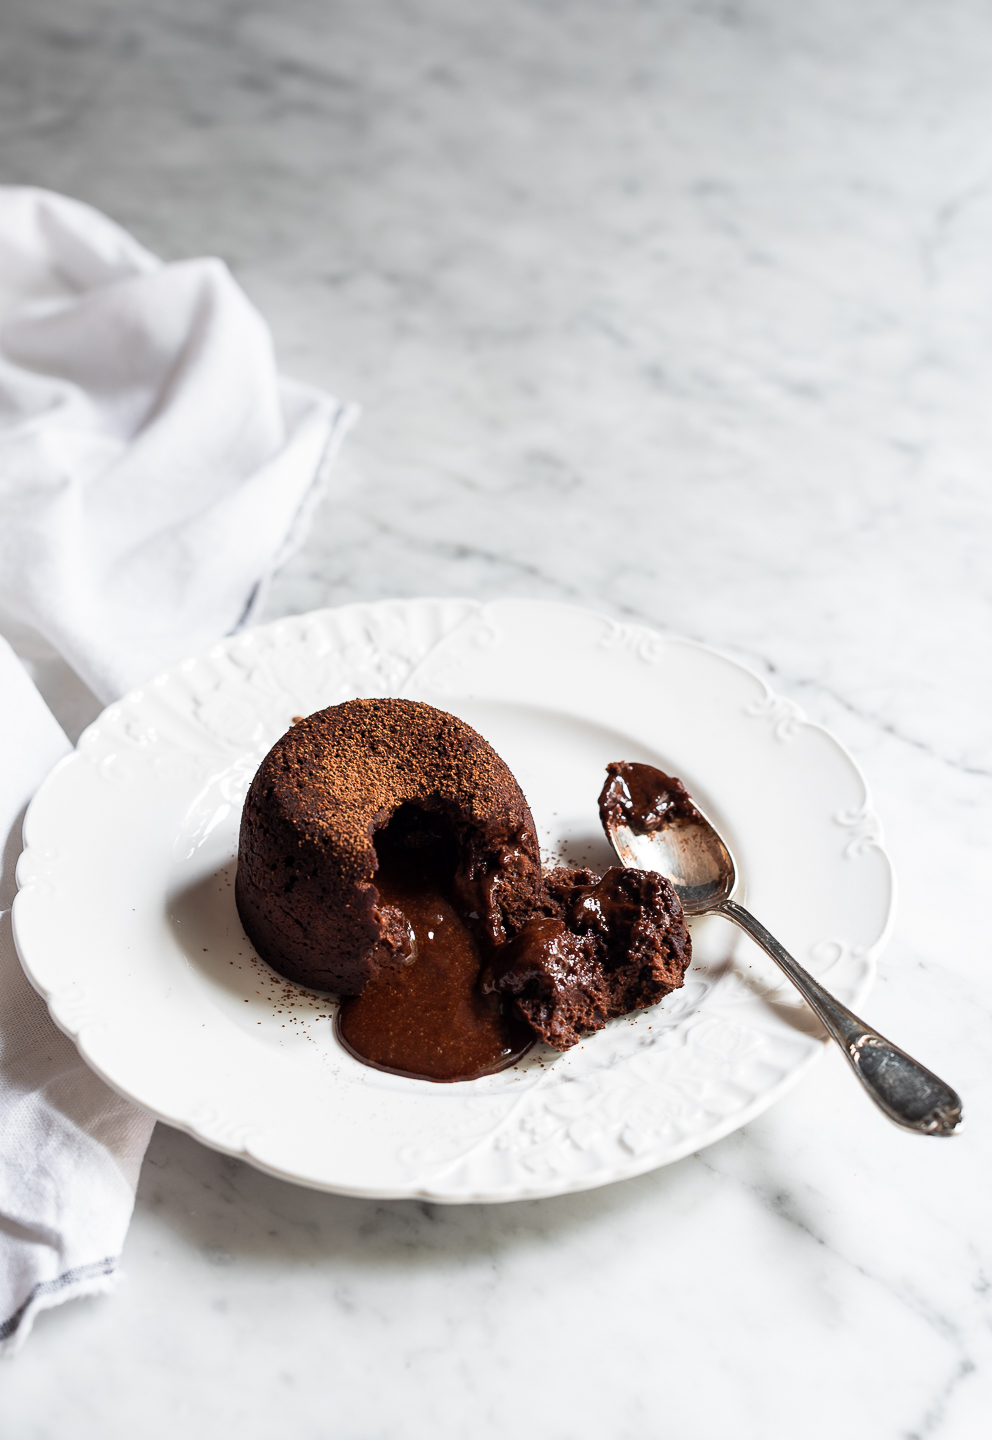 Chocolate lava love cake for Two